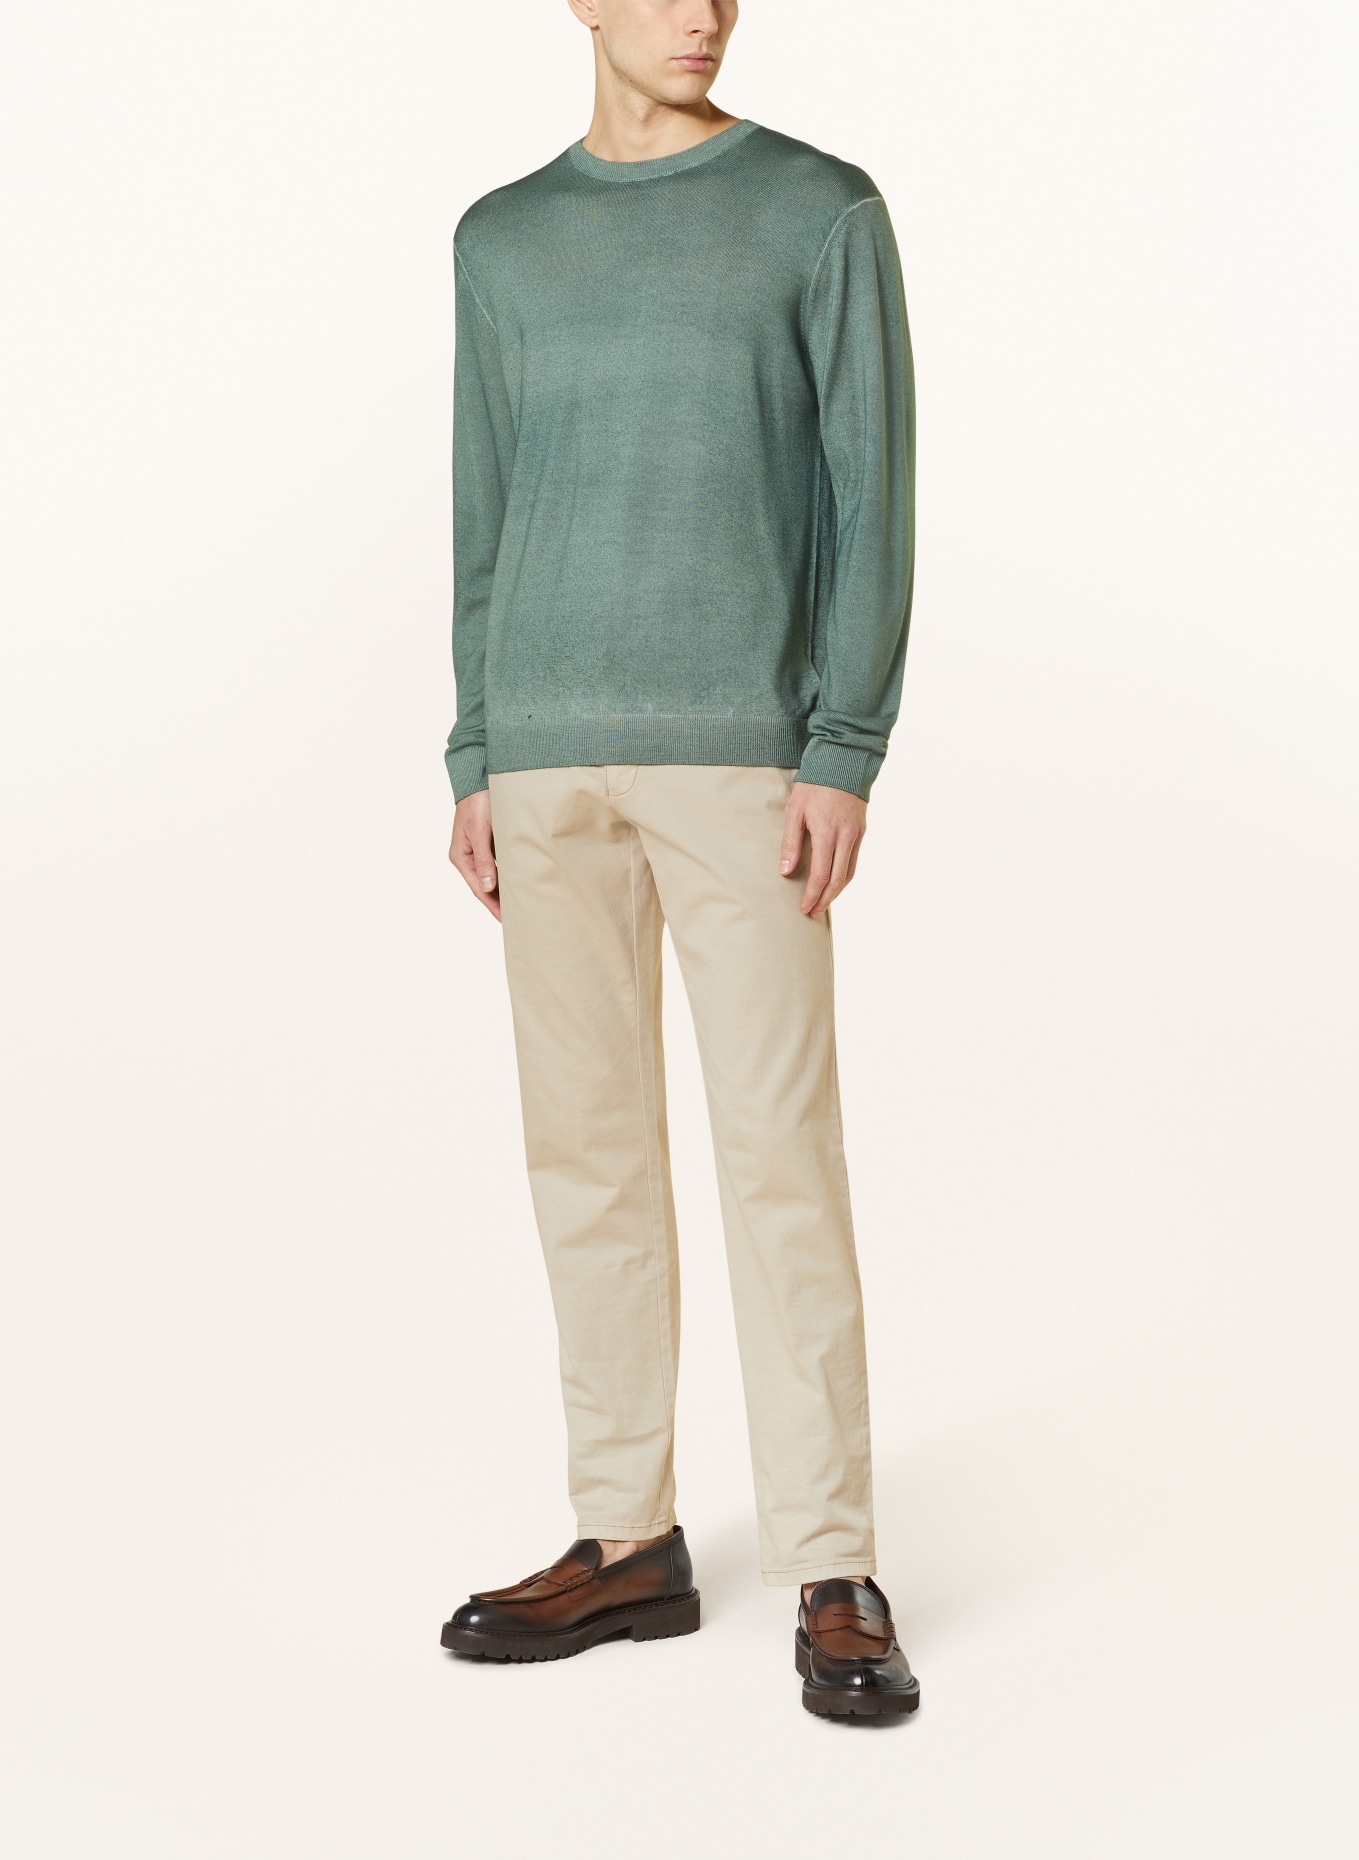 STROKESMAN'S Sweater, Color: OLIVE (Image 2)